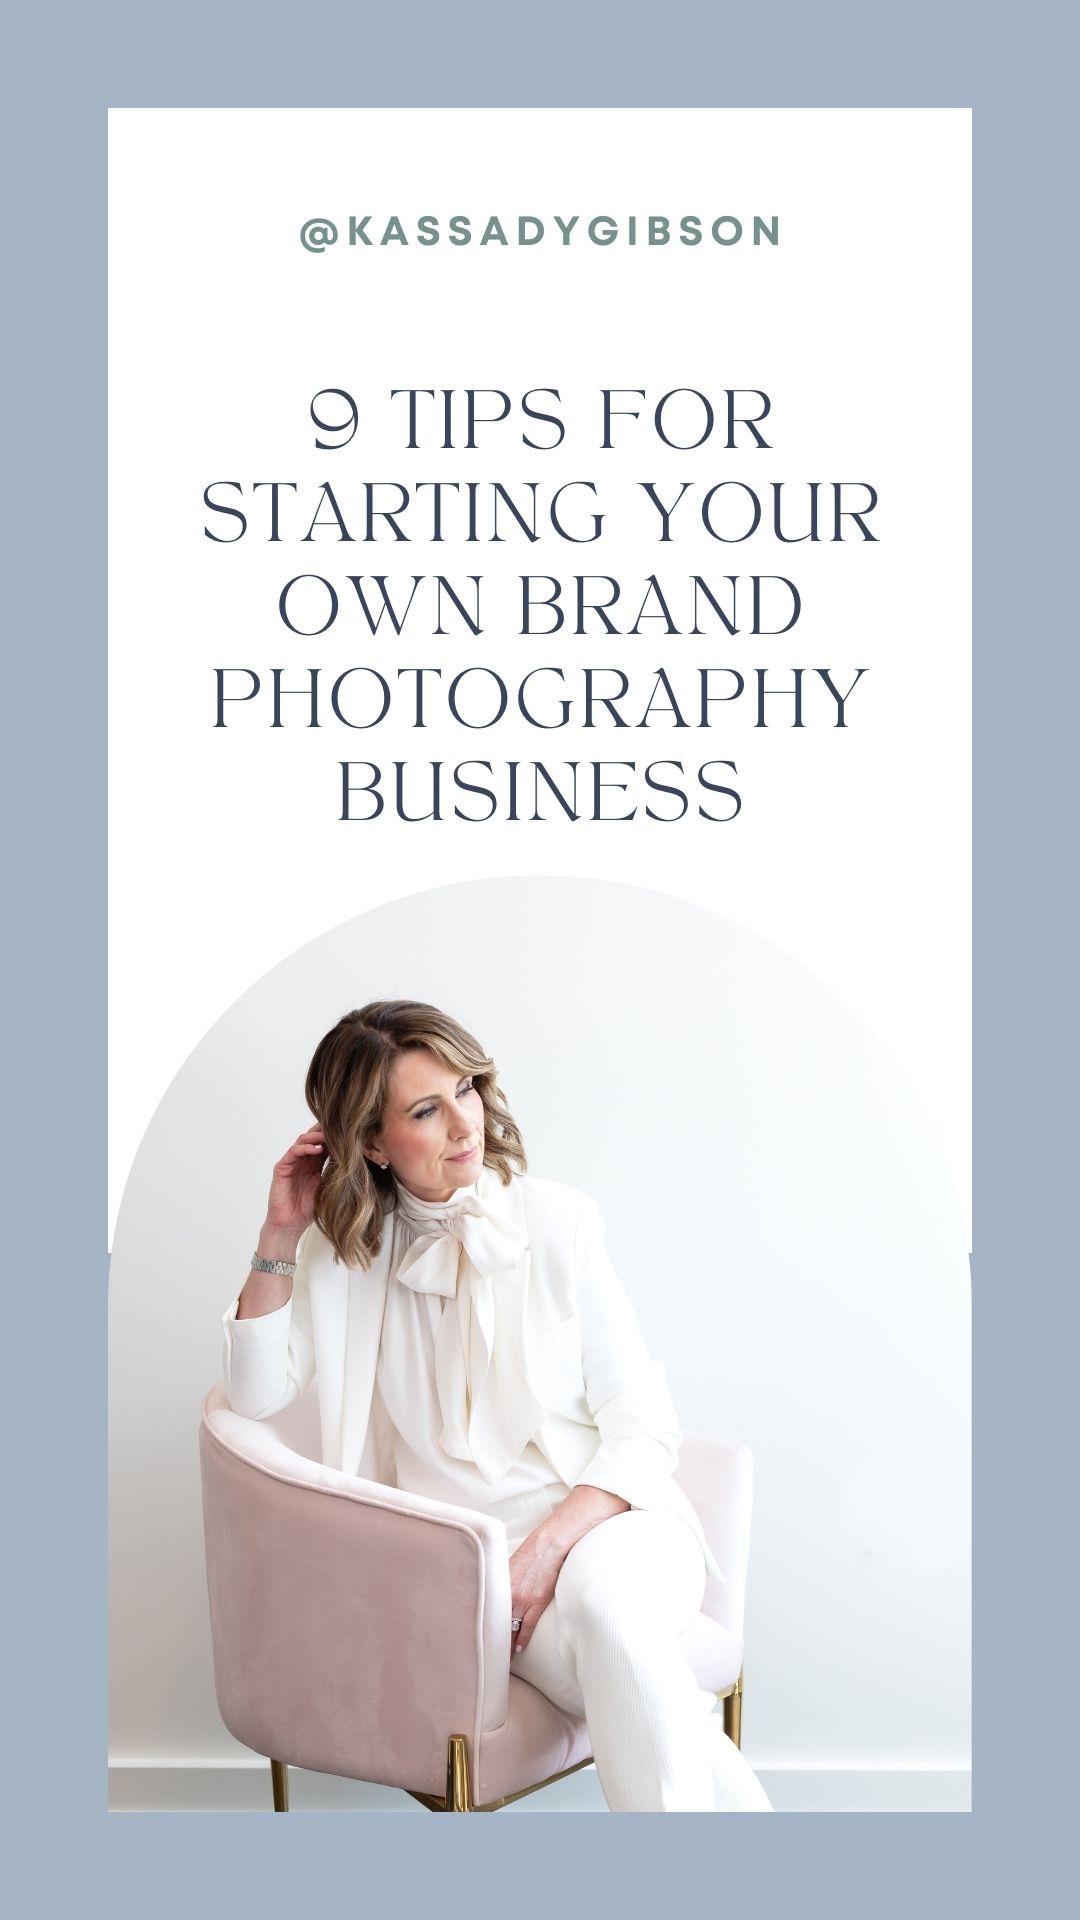 graphic 9 Tips for Starting Your Own Brand Photography Business with image of woman sitting in pink chair during a personal branding photoshoot